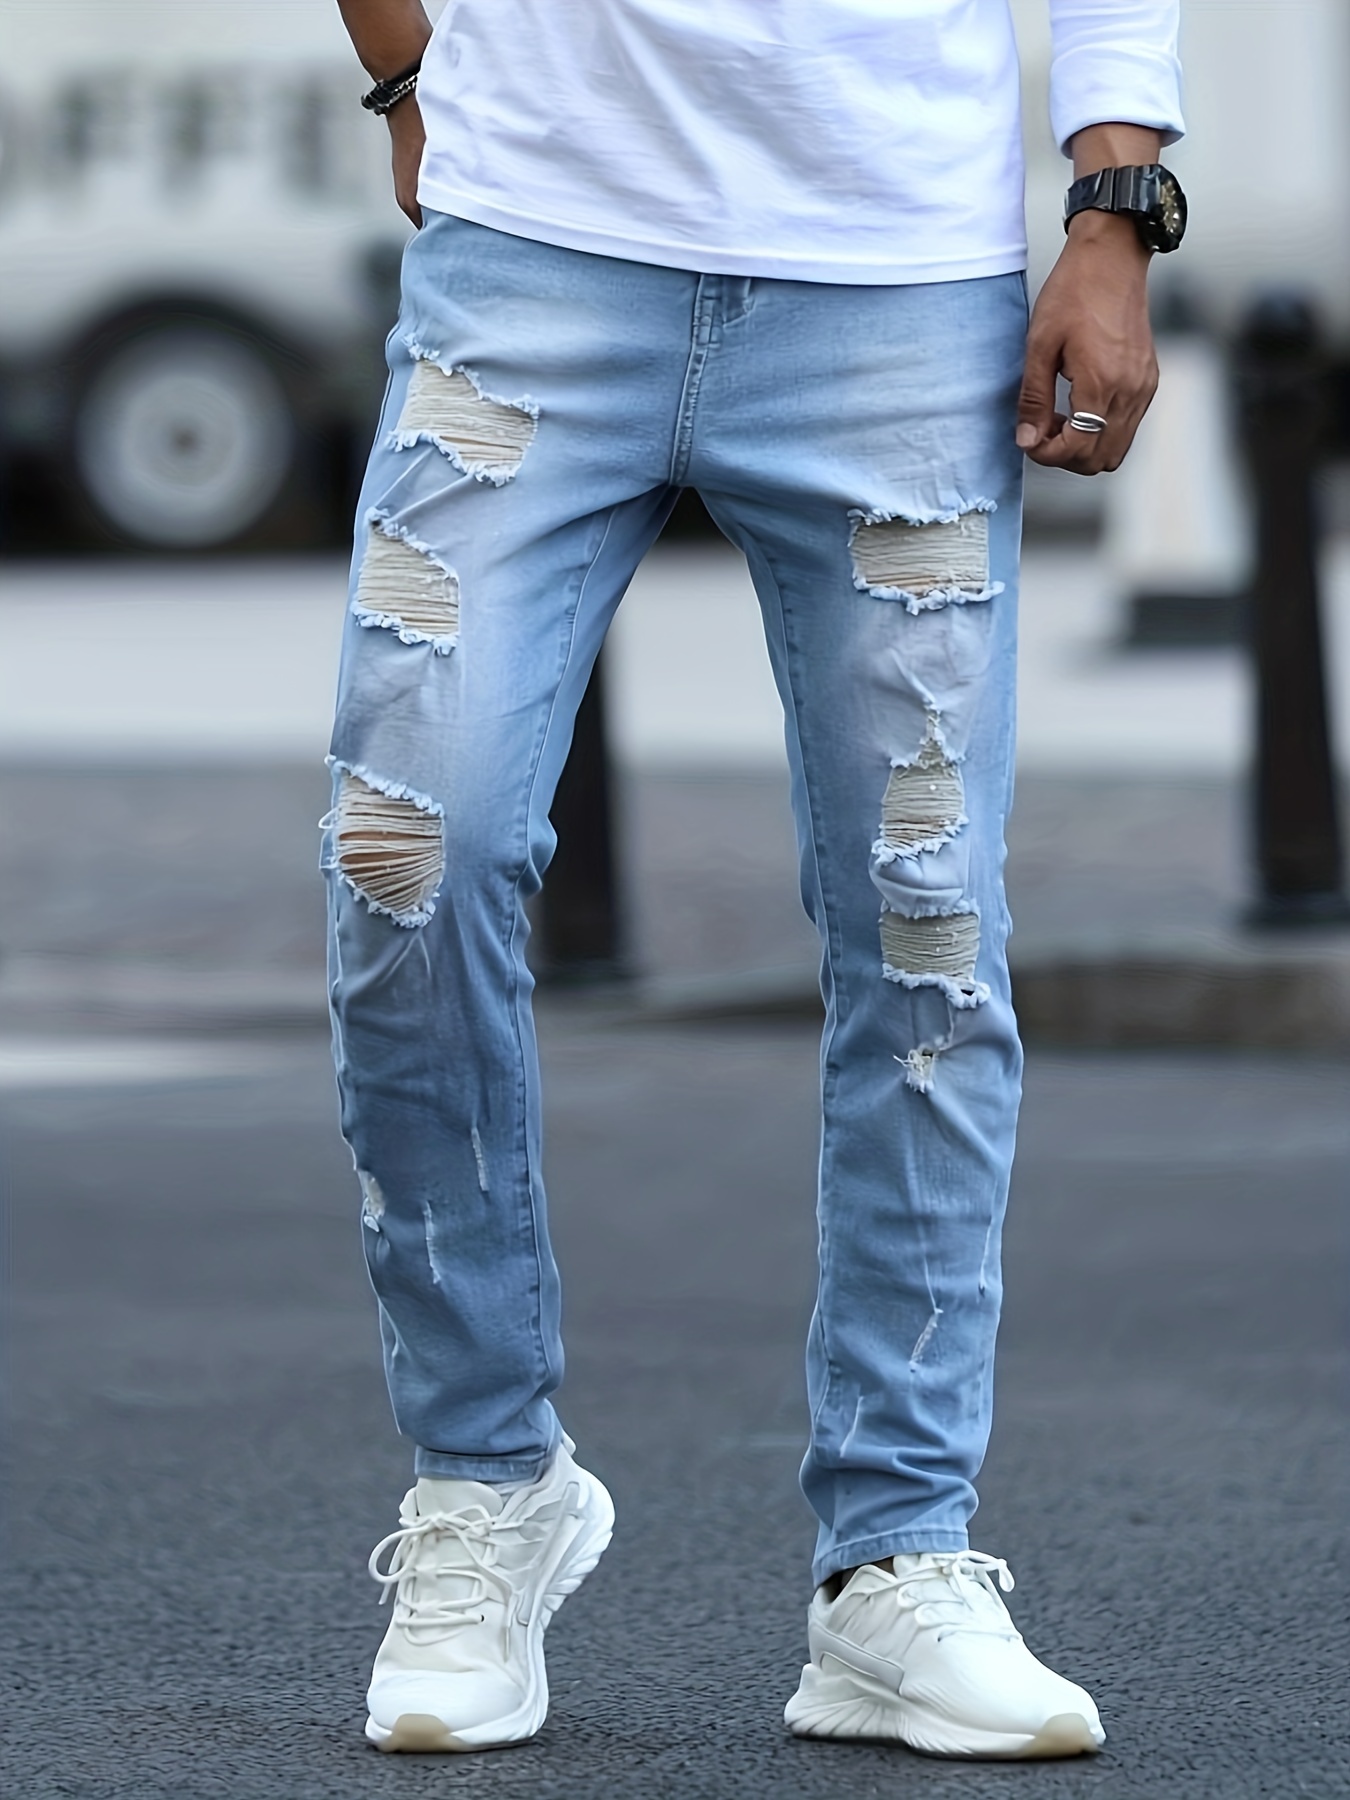 Slim Fit Jeans, Men's Casual Street Style Medium Stretch Distressed Denim  Pants With Pockets